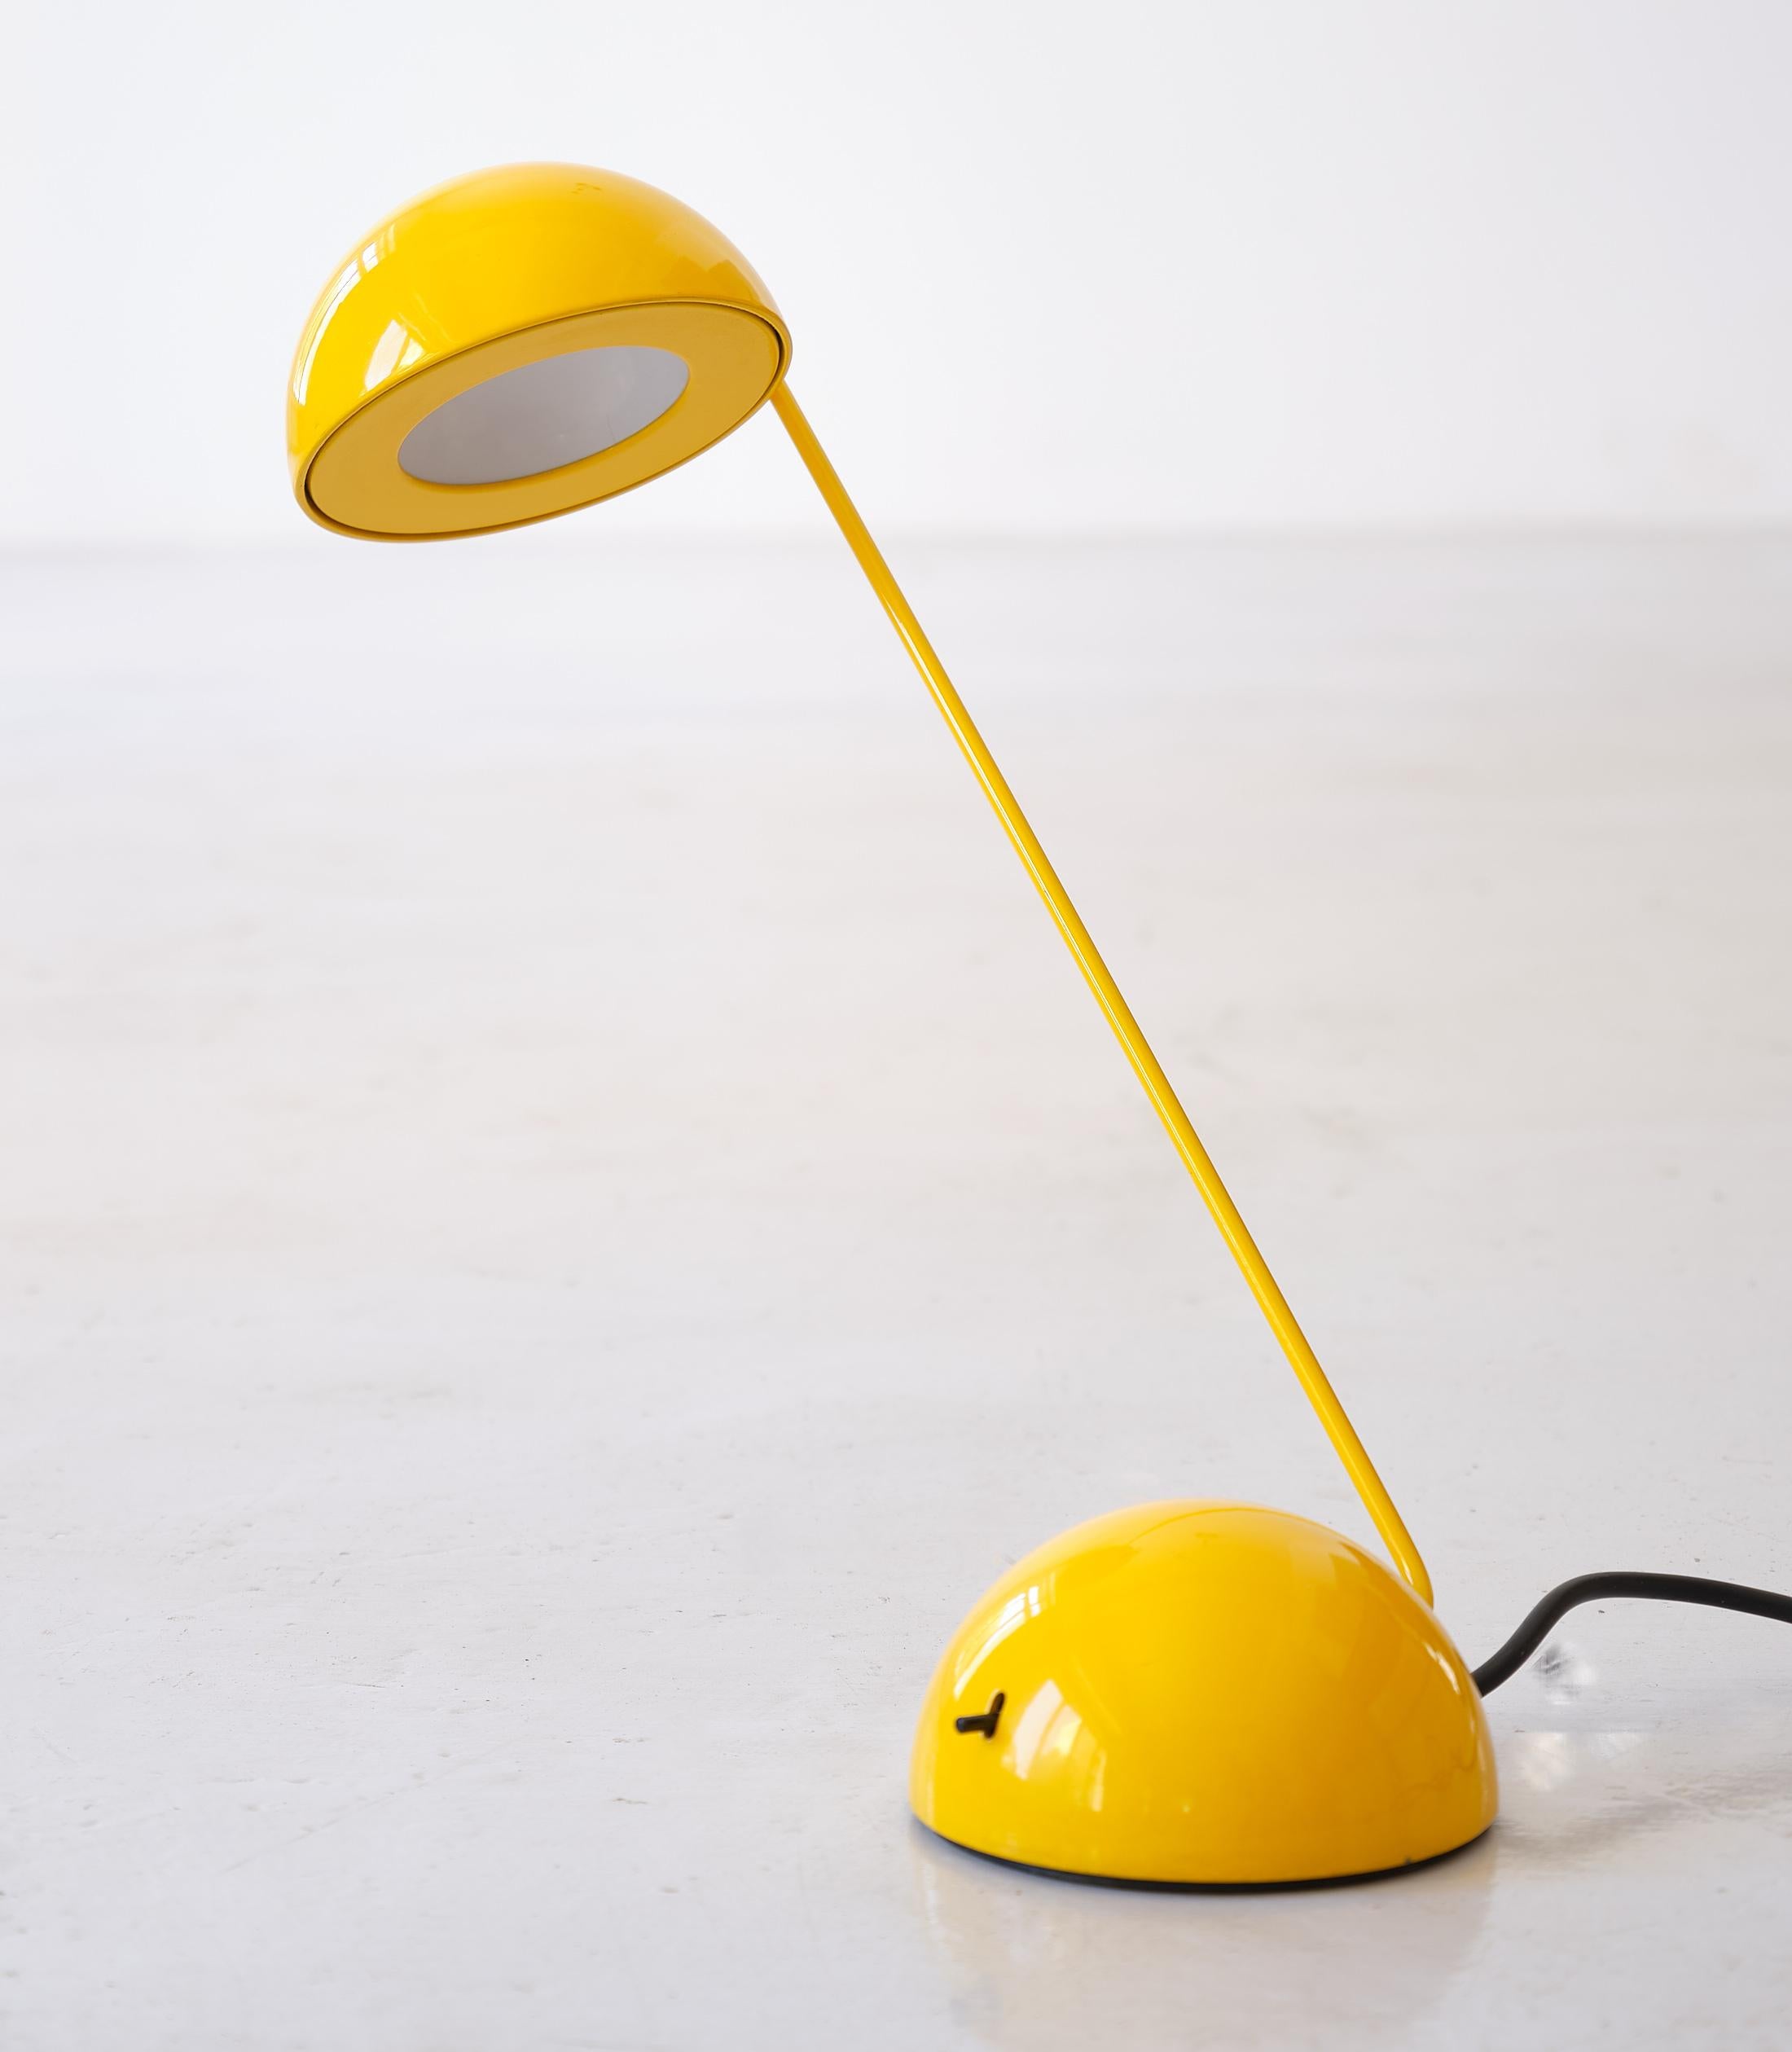 Barbieri & Marianelli ‘Bikini’ table lamps for Tronconi.
Manufactured in Italy during the 1980s

Rod and hat of this lamp can be placed in different positions


Original working wire.